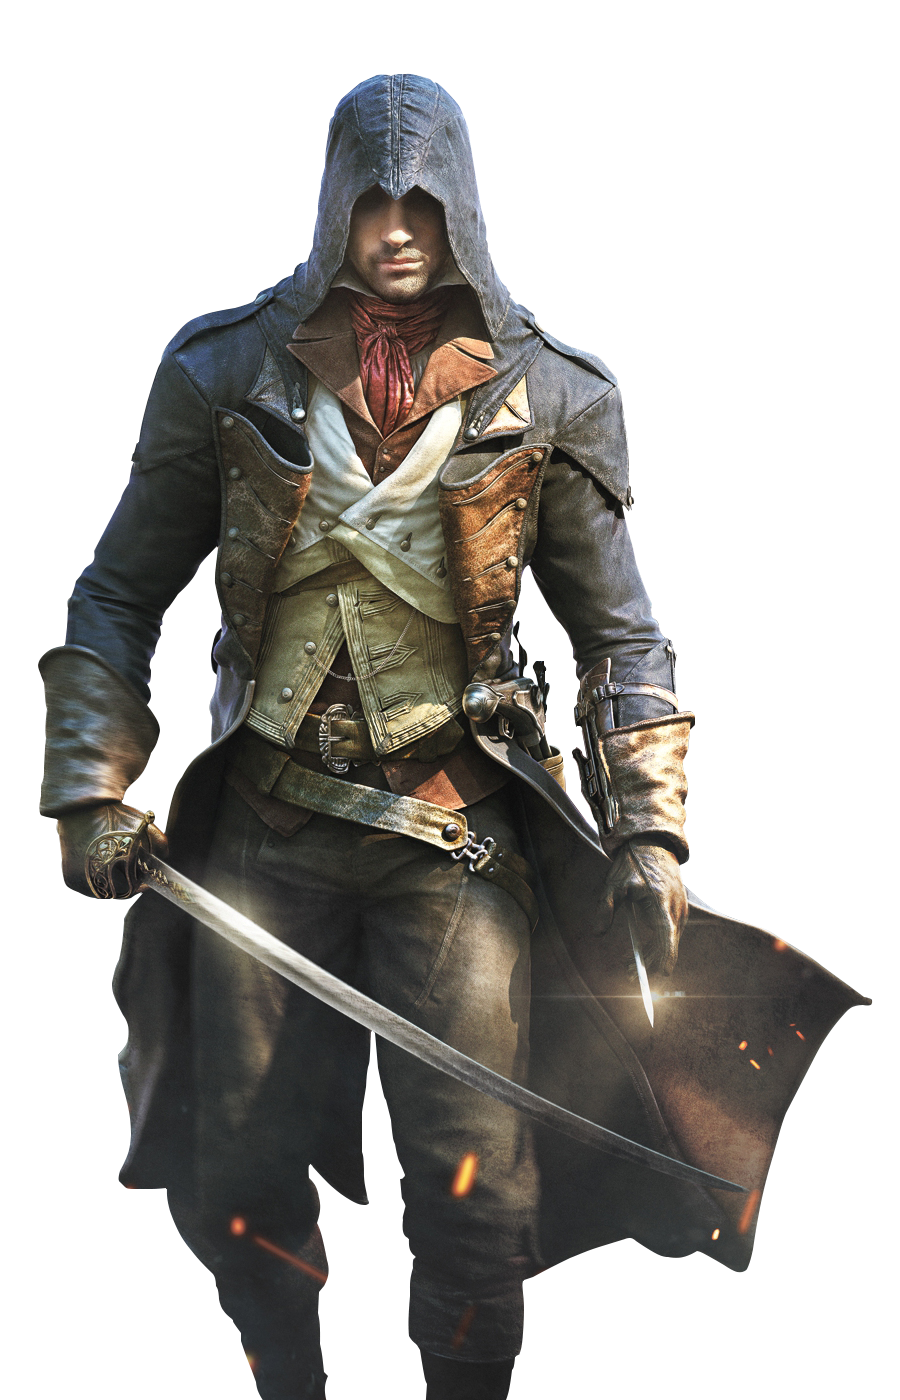 Assassins Creed Unity PNGDownload, Assassins Creed Unity PNG - Free PNG